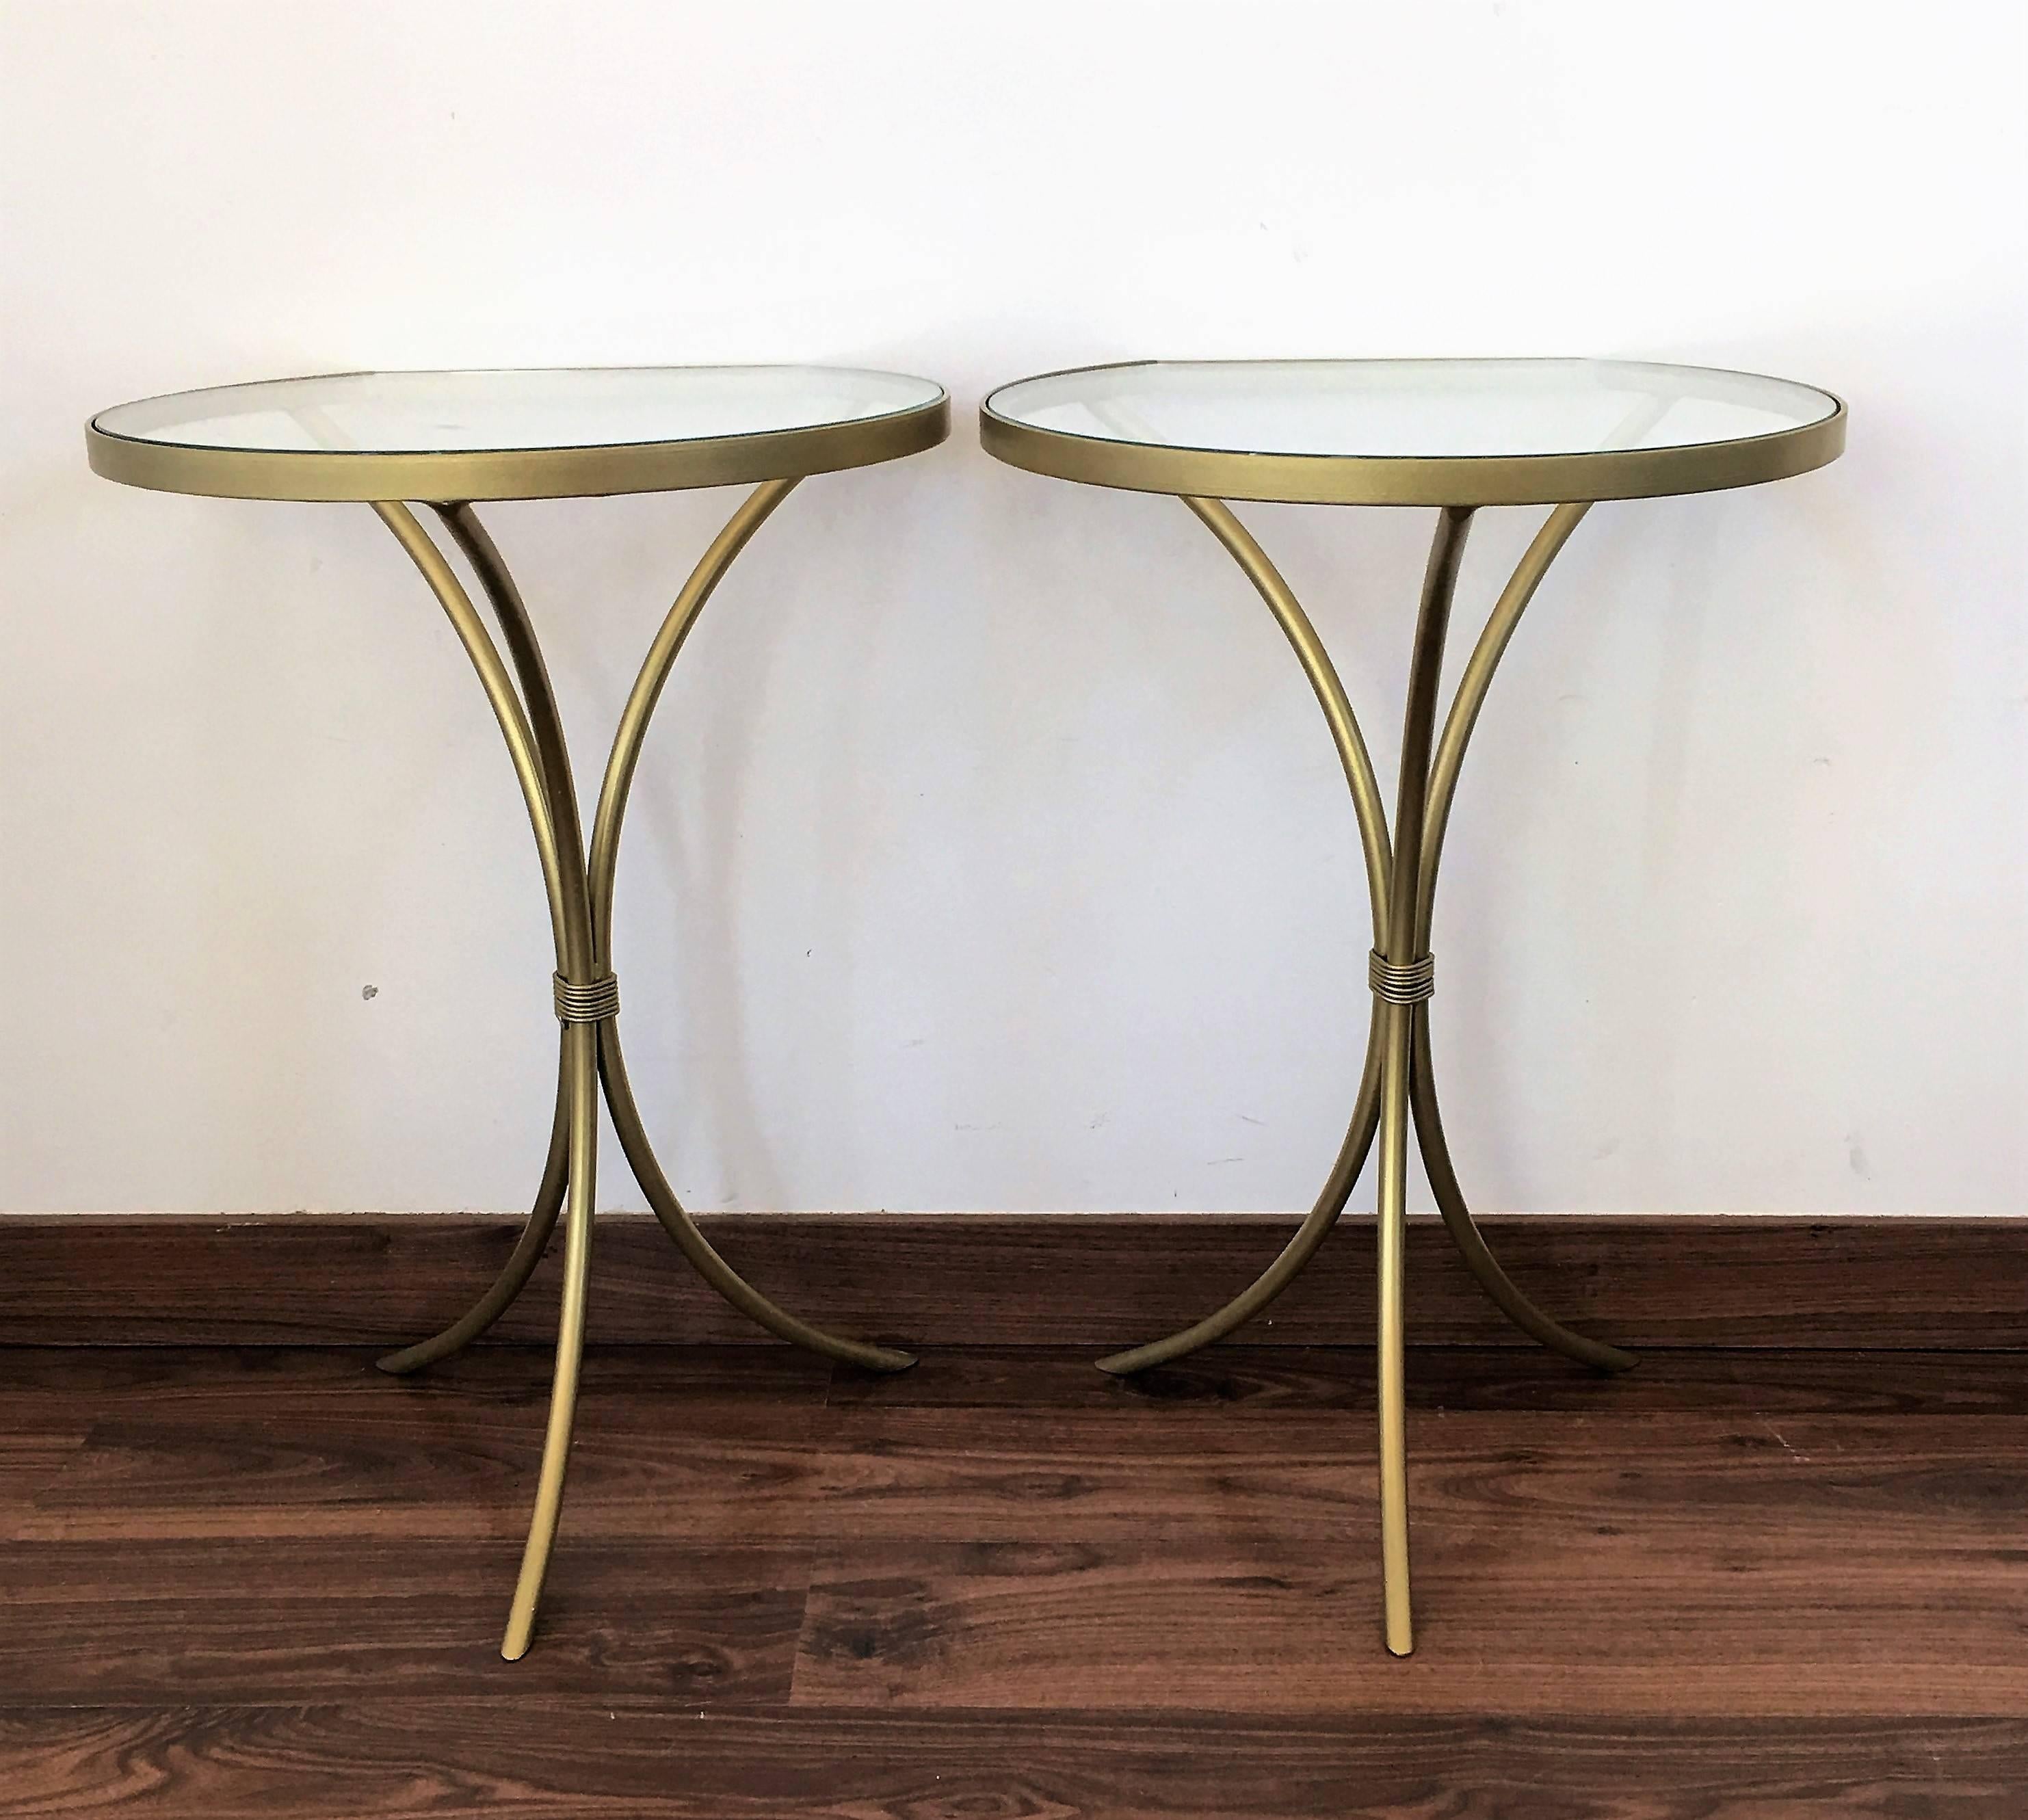 Pair of Italian midcentury glass and brass tripod side, end or nightstands
A pair of Italian midcentury handblown Murano glass side or end tables with round glass tops embedded by large iron finials supported by gold fluted columns resting on gold